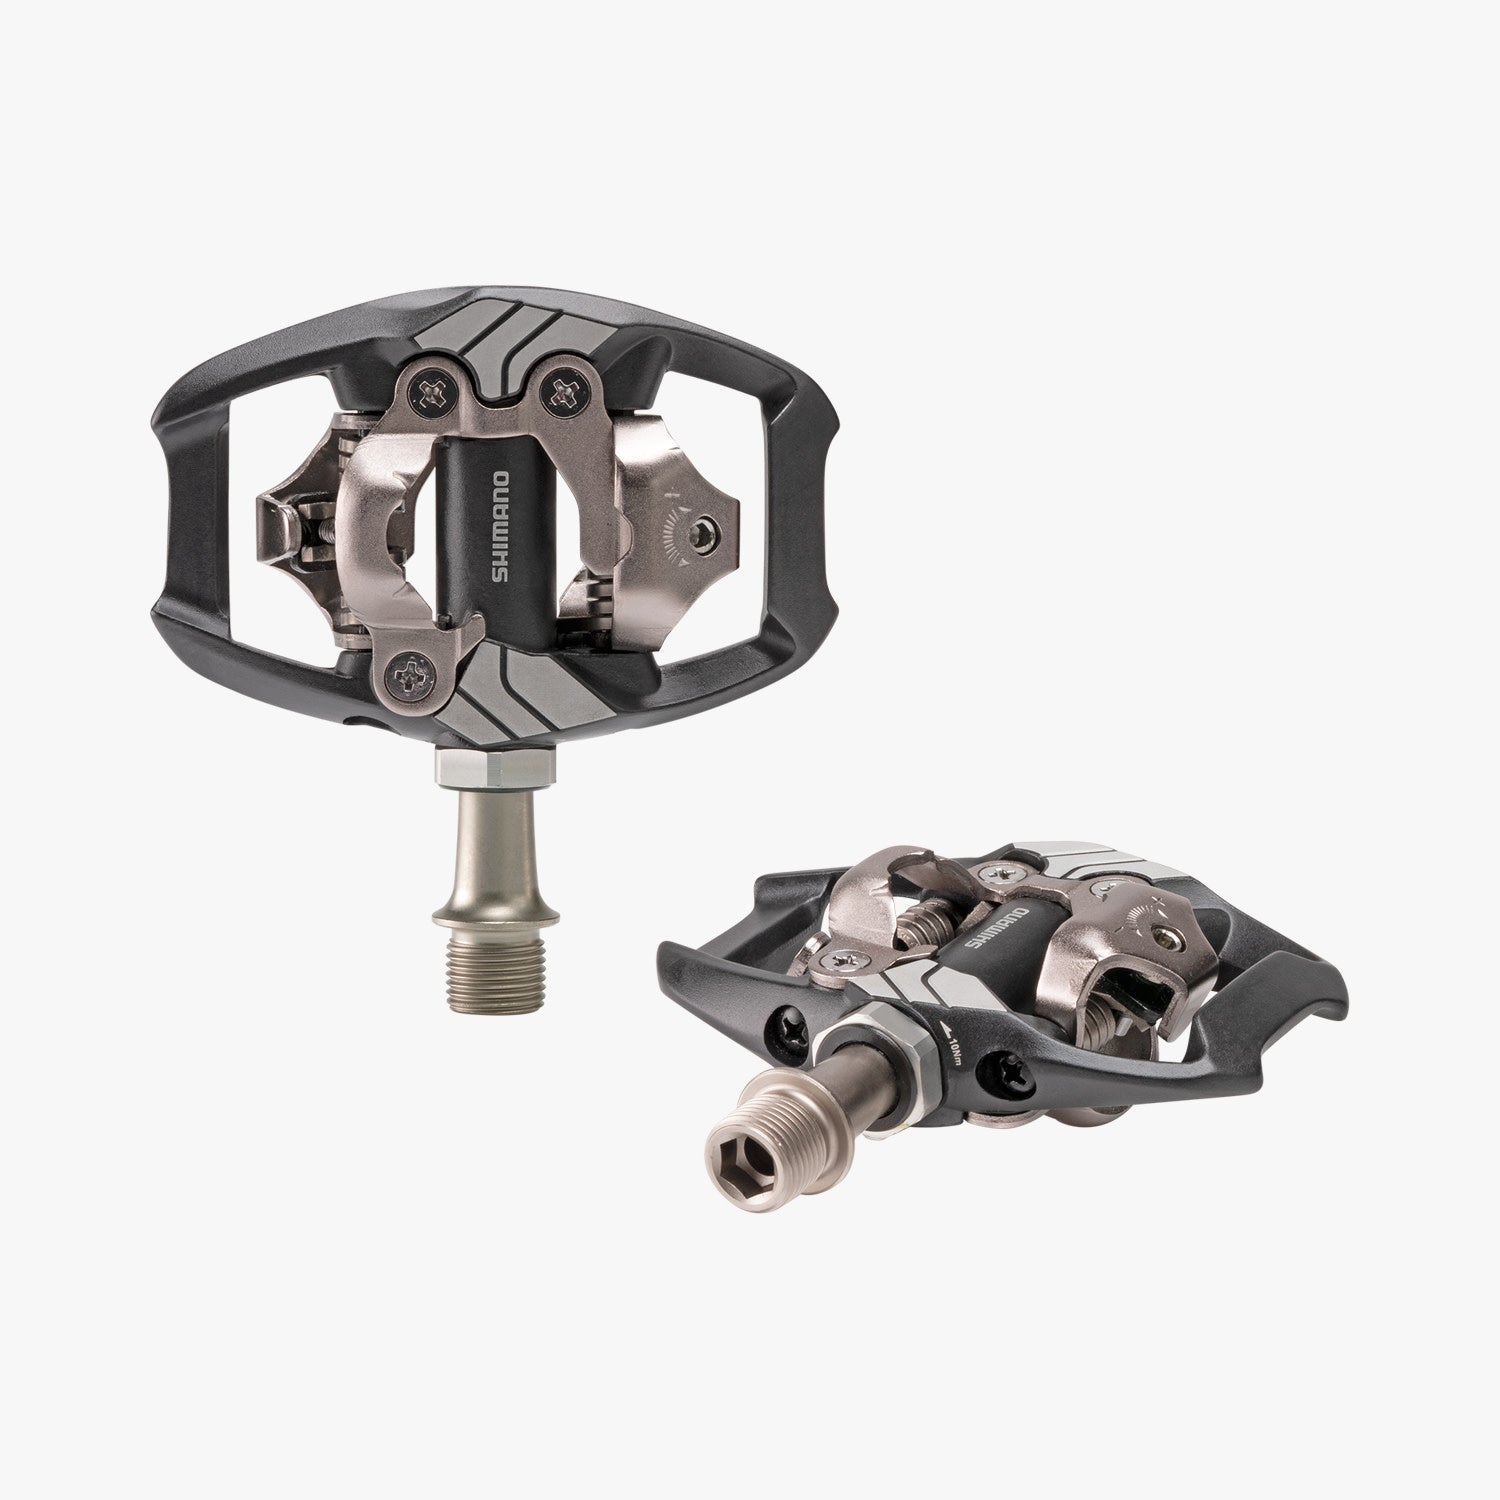 SHIMANO SPD Pedal dual sided for Trail riding / BMX